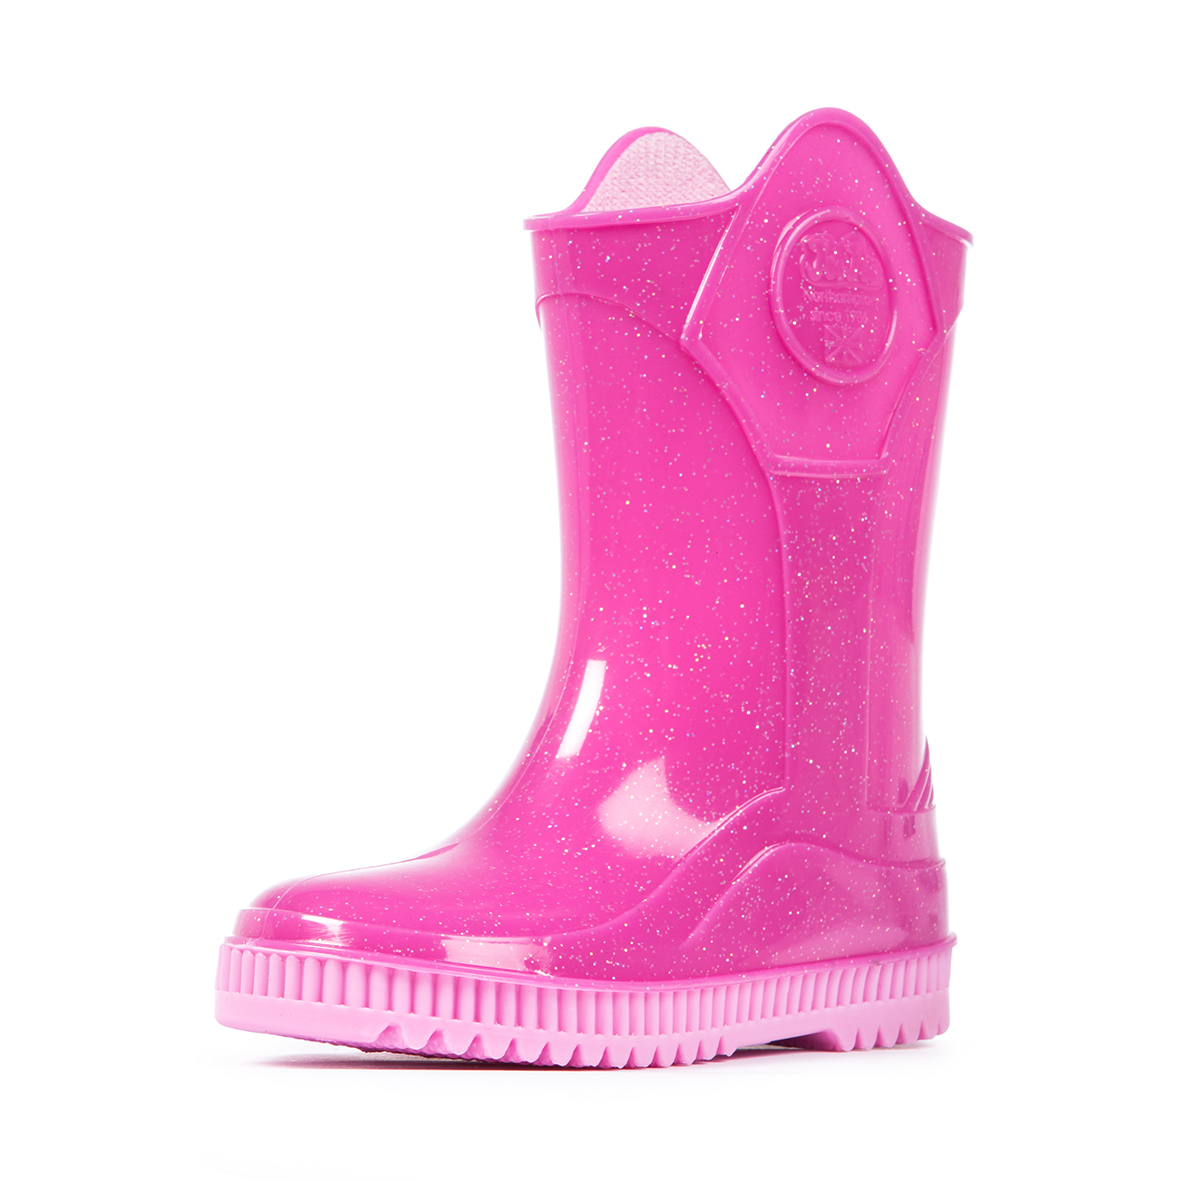 pale pink wellies